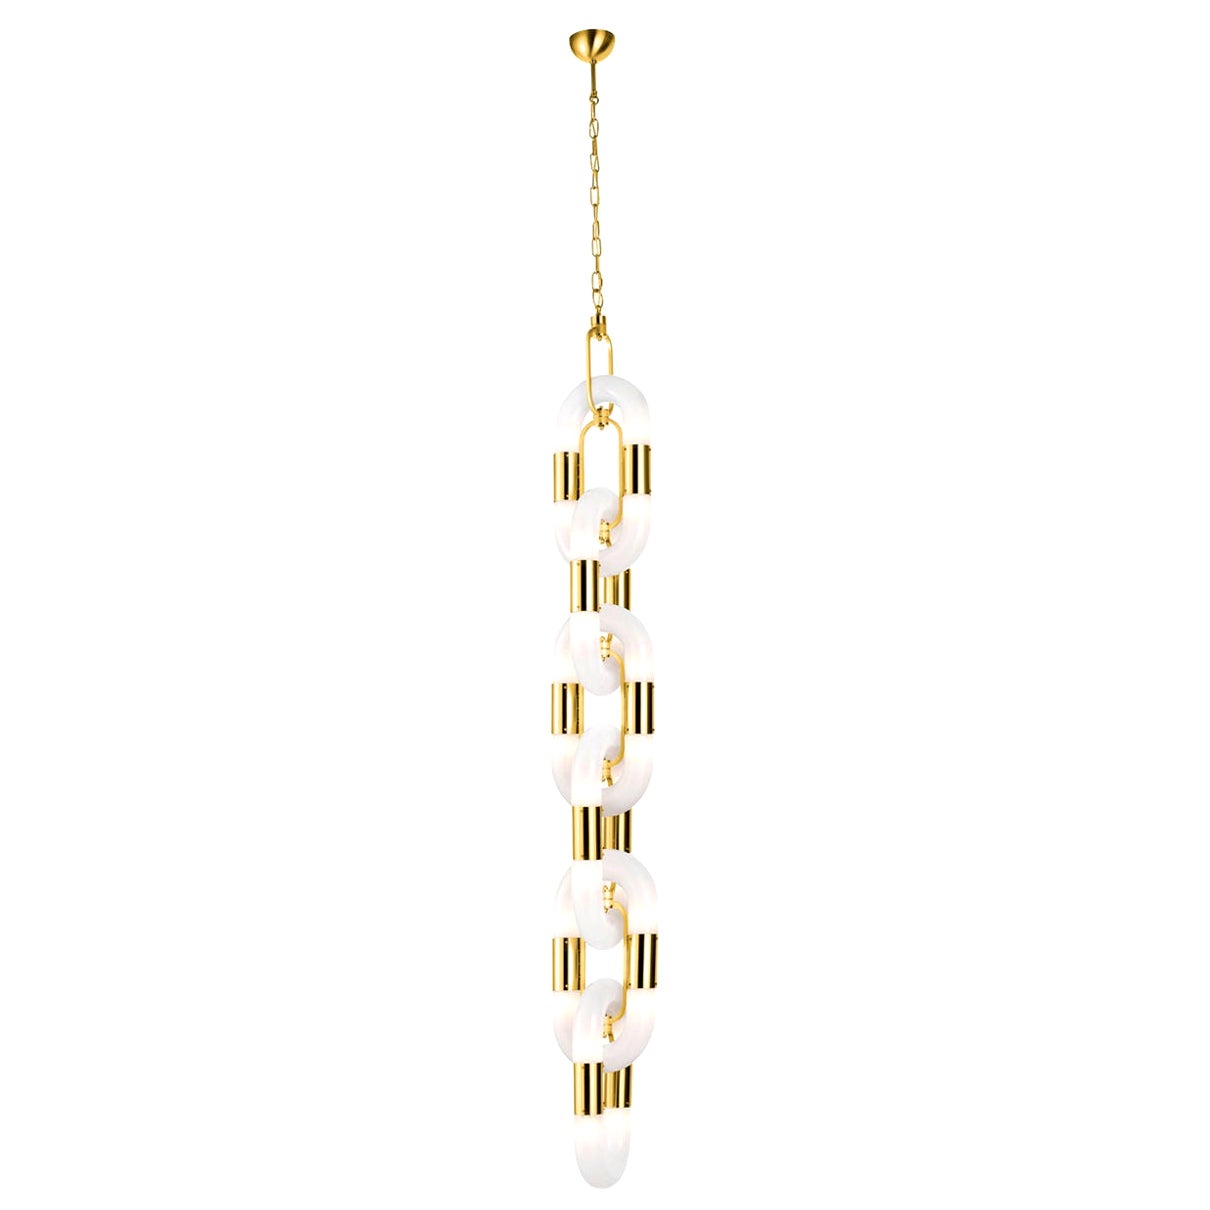 Chain Gold 6 Links Pendant Lamp For Sale